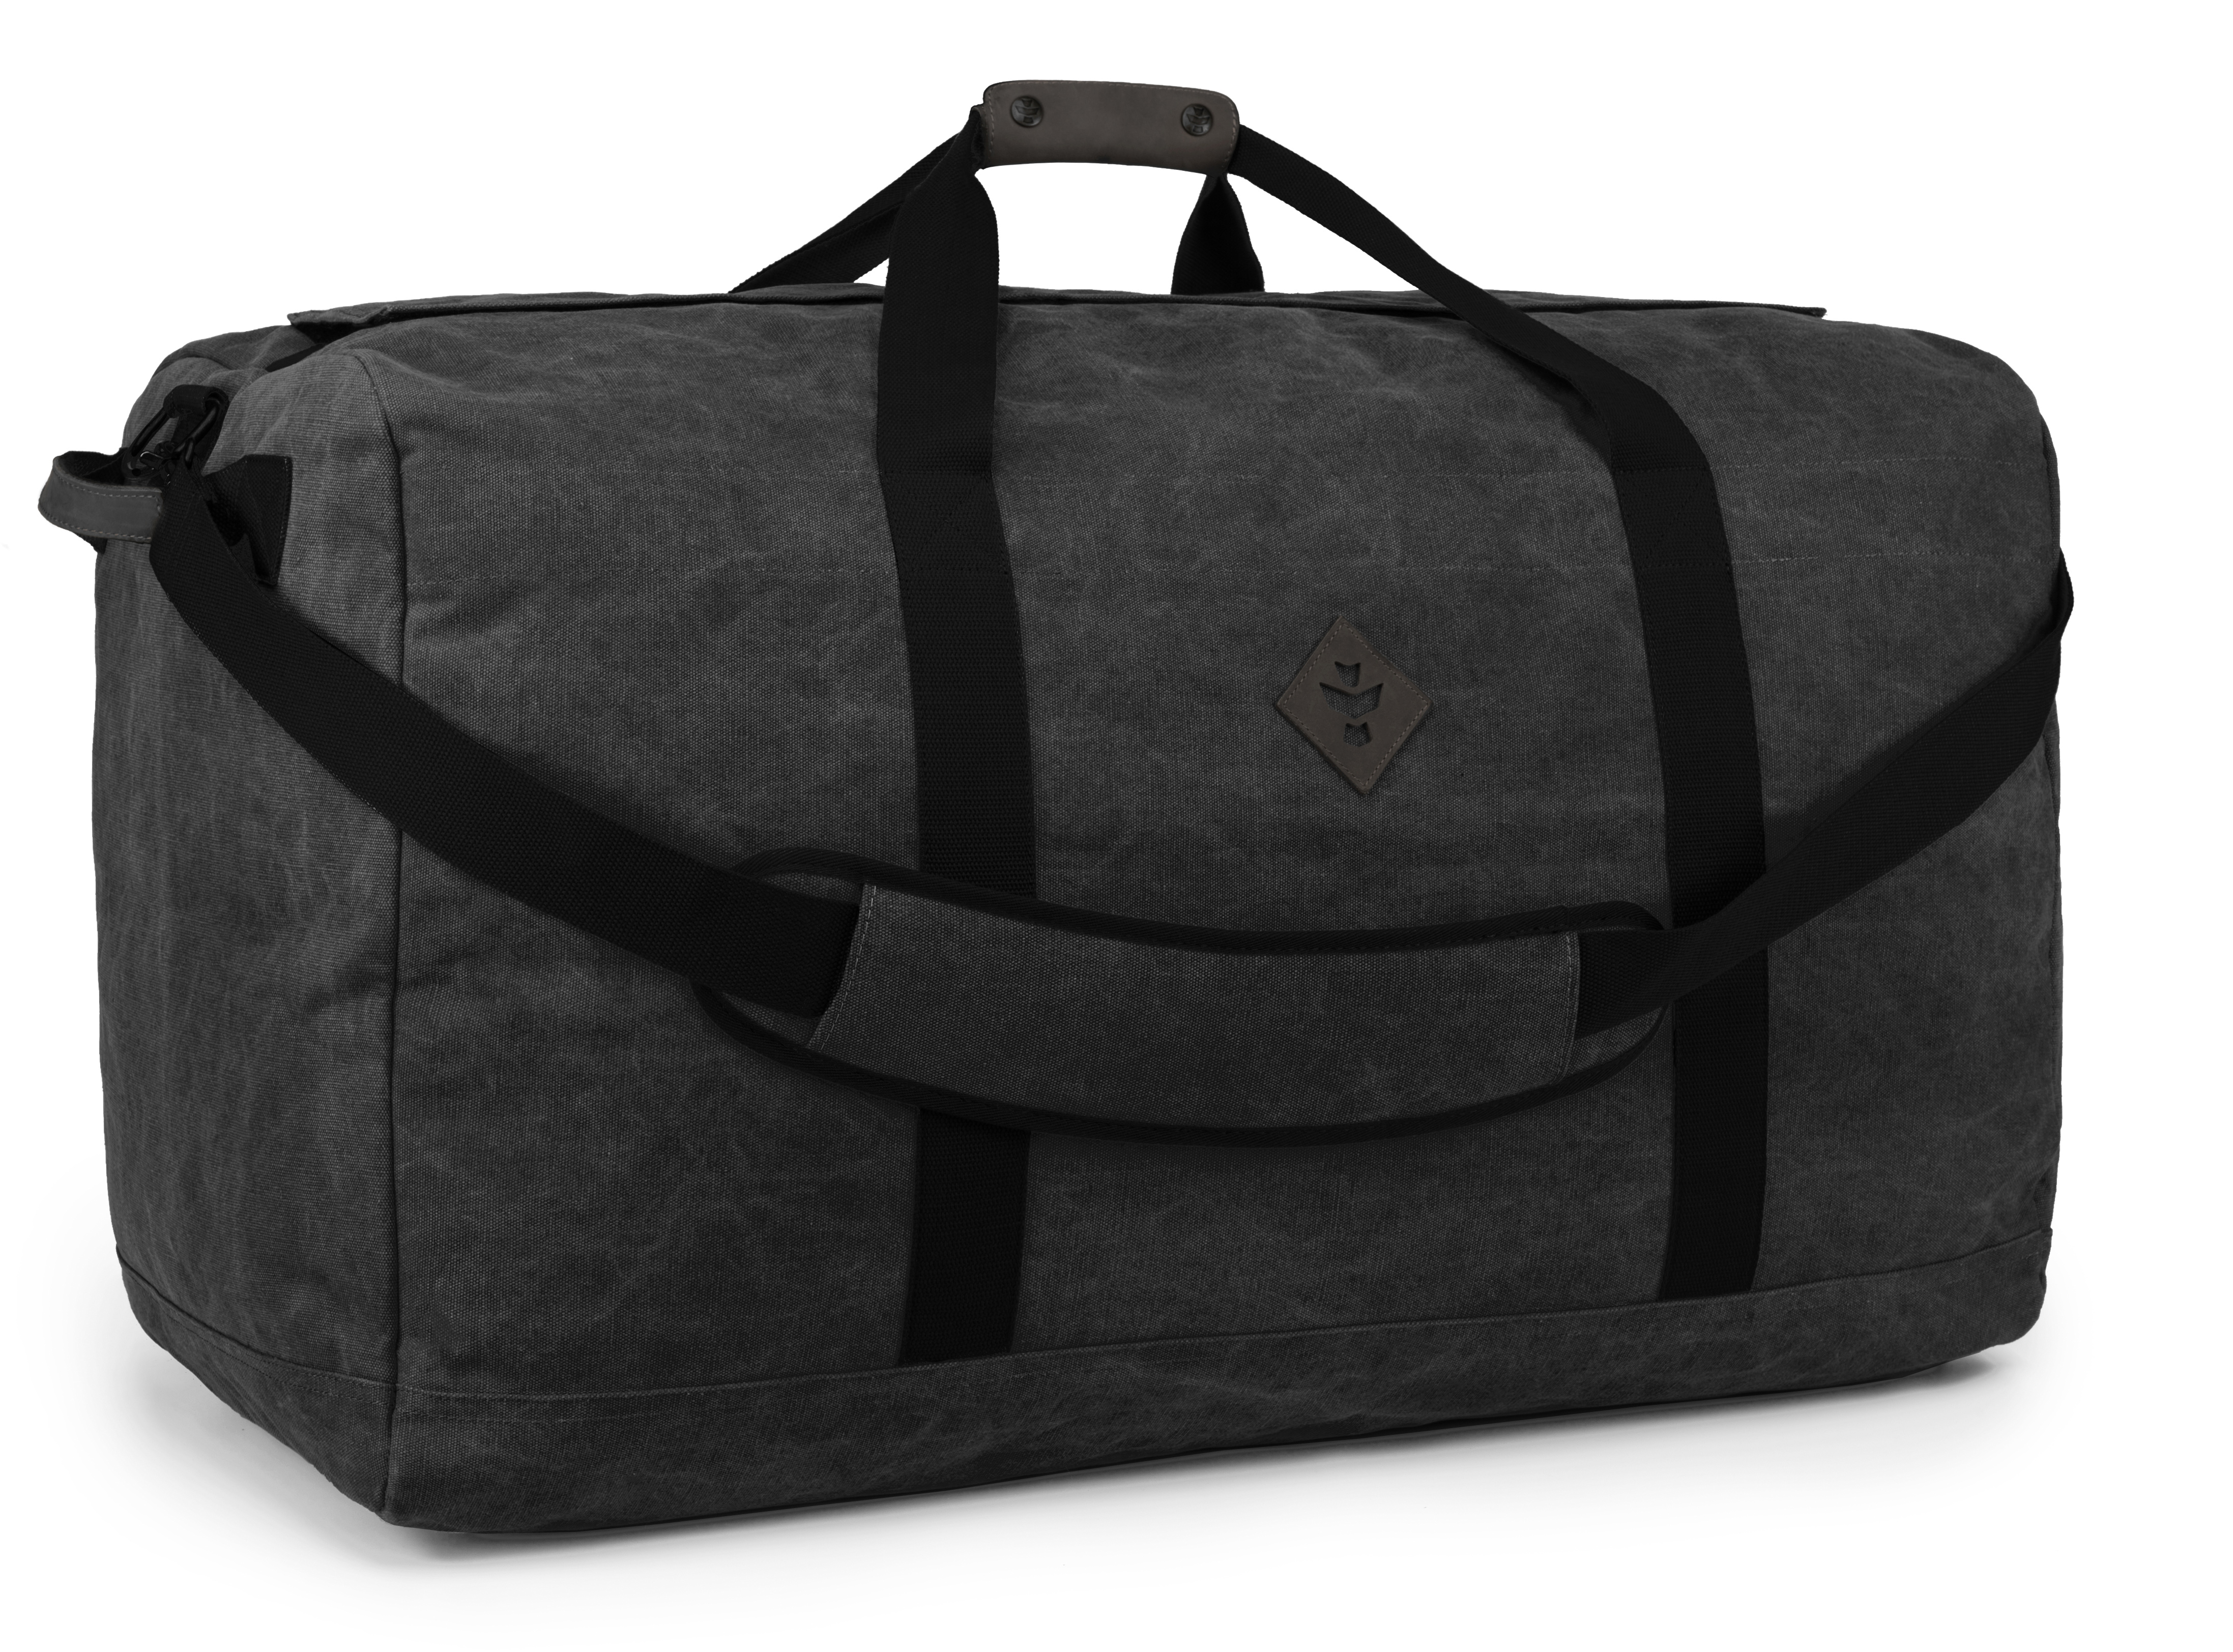 The Northerner - Smoke, XL Duffle